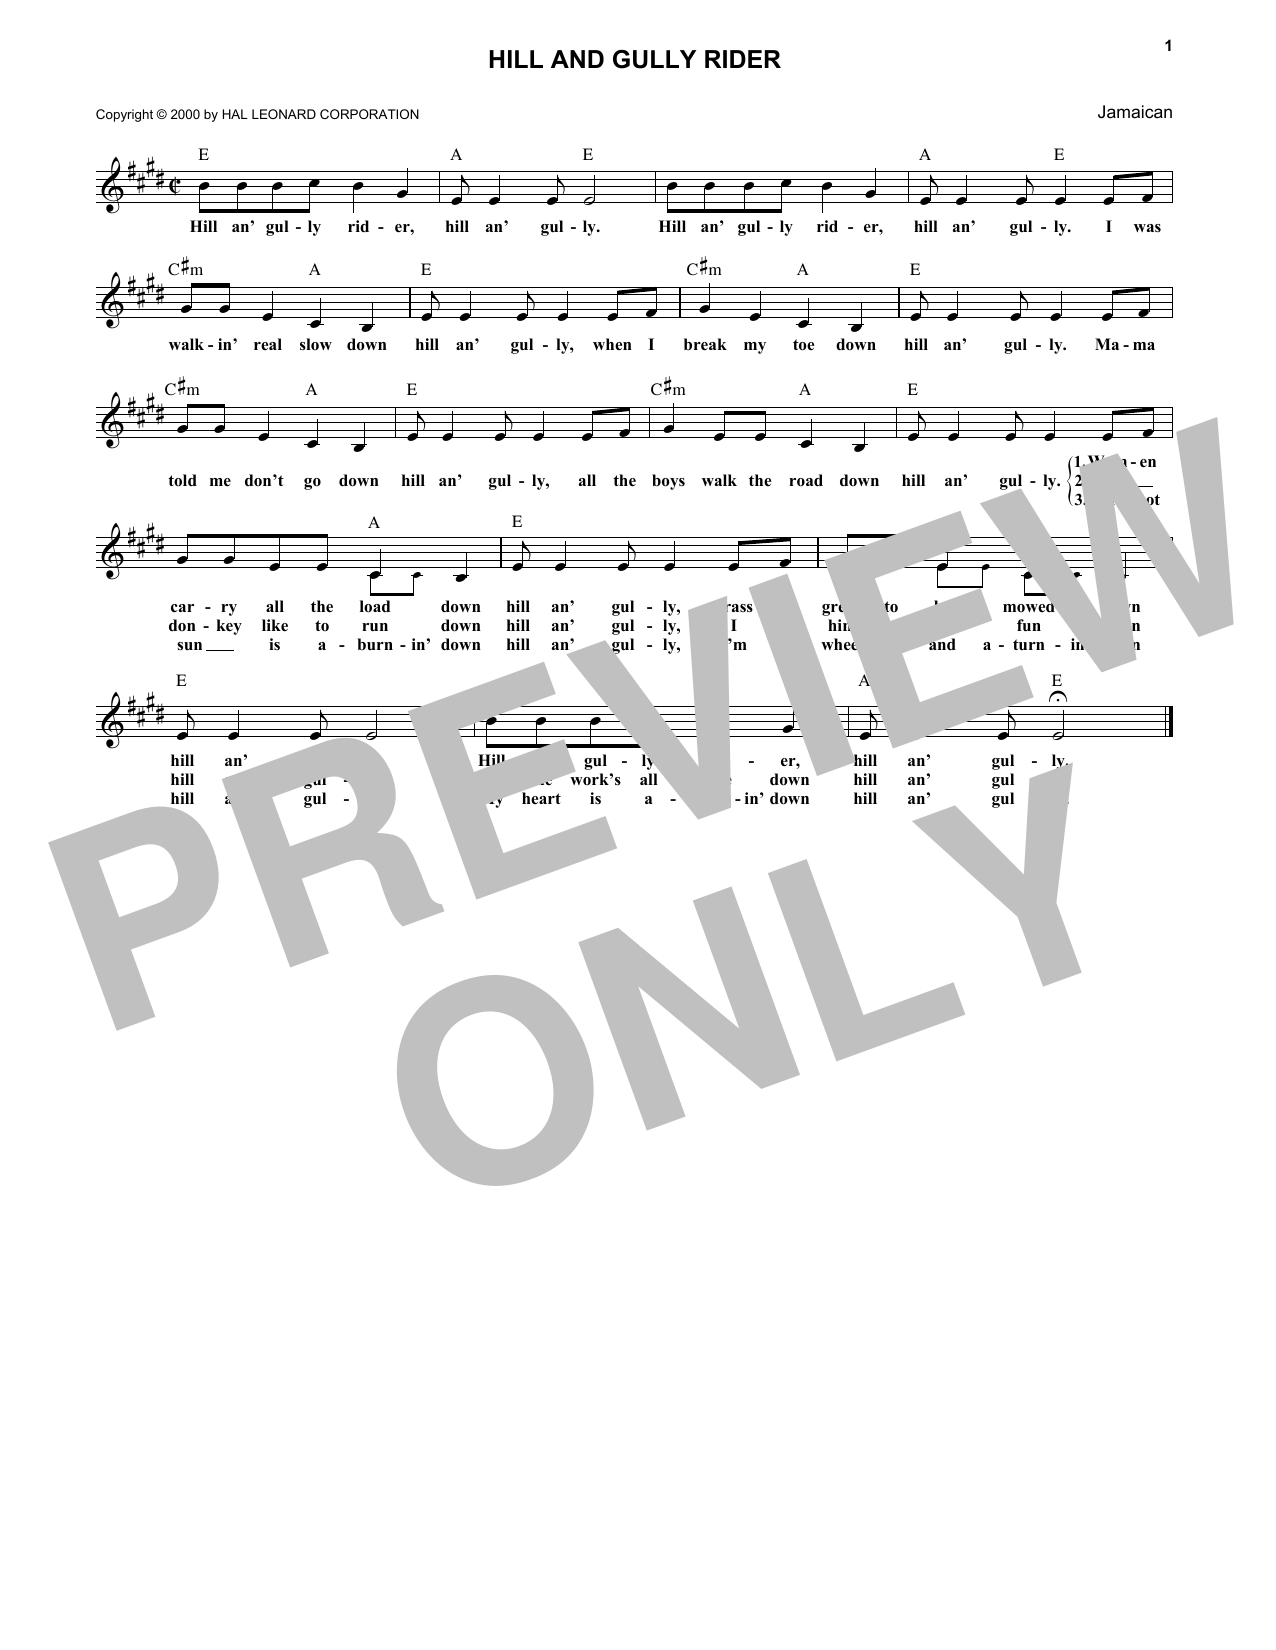 Download Caribbean Hill And Gully Rider Sheet Music